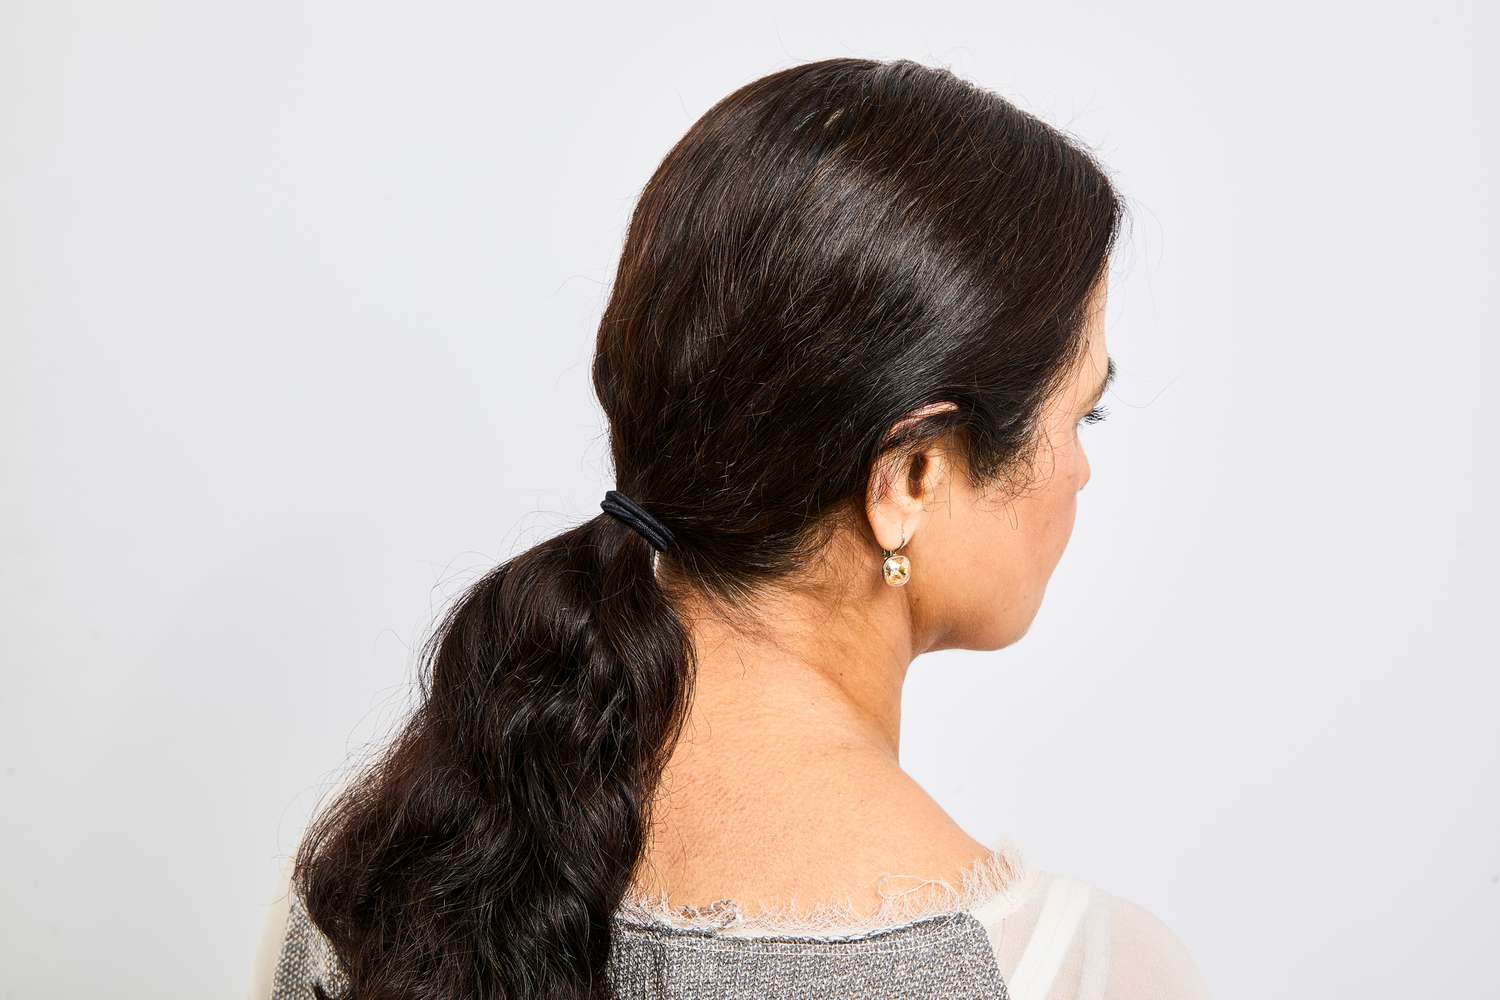 A person's ponytail after styling with Bumble and Bumble Spray de Mode Flexible Hold Hairspray